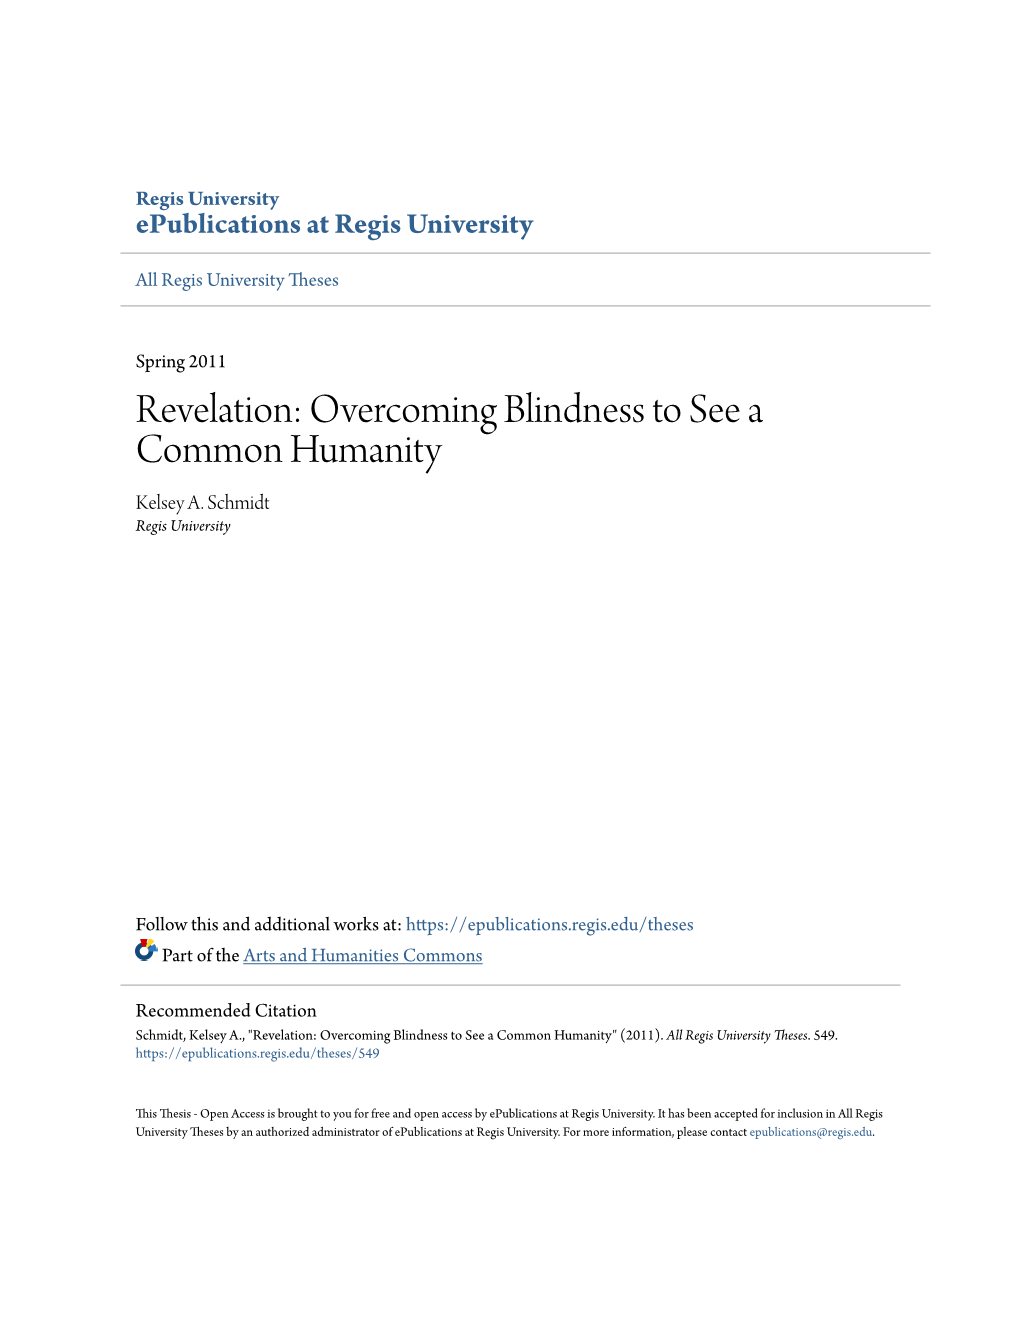 Revelation: Overcoming Blindness to See a Common Humanity Kelsey A